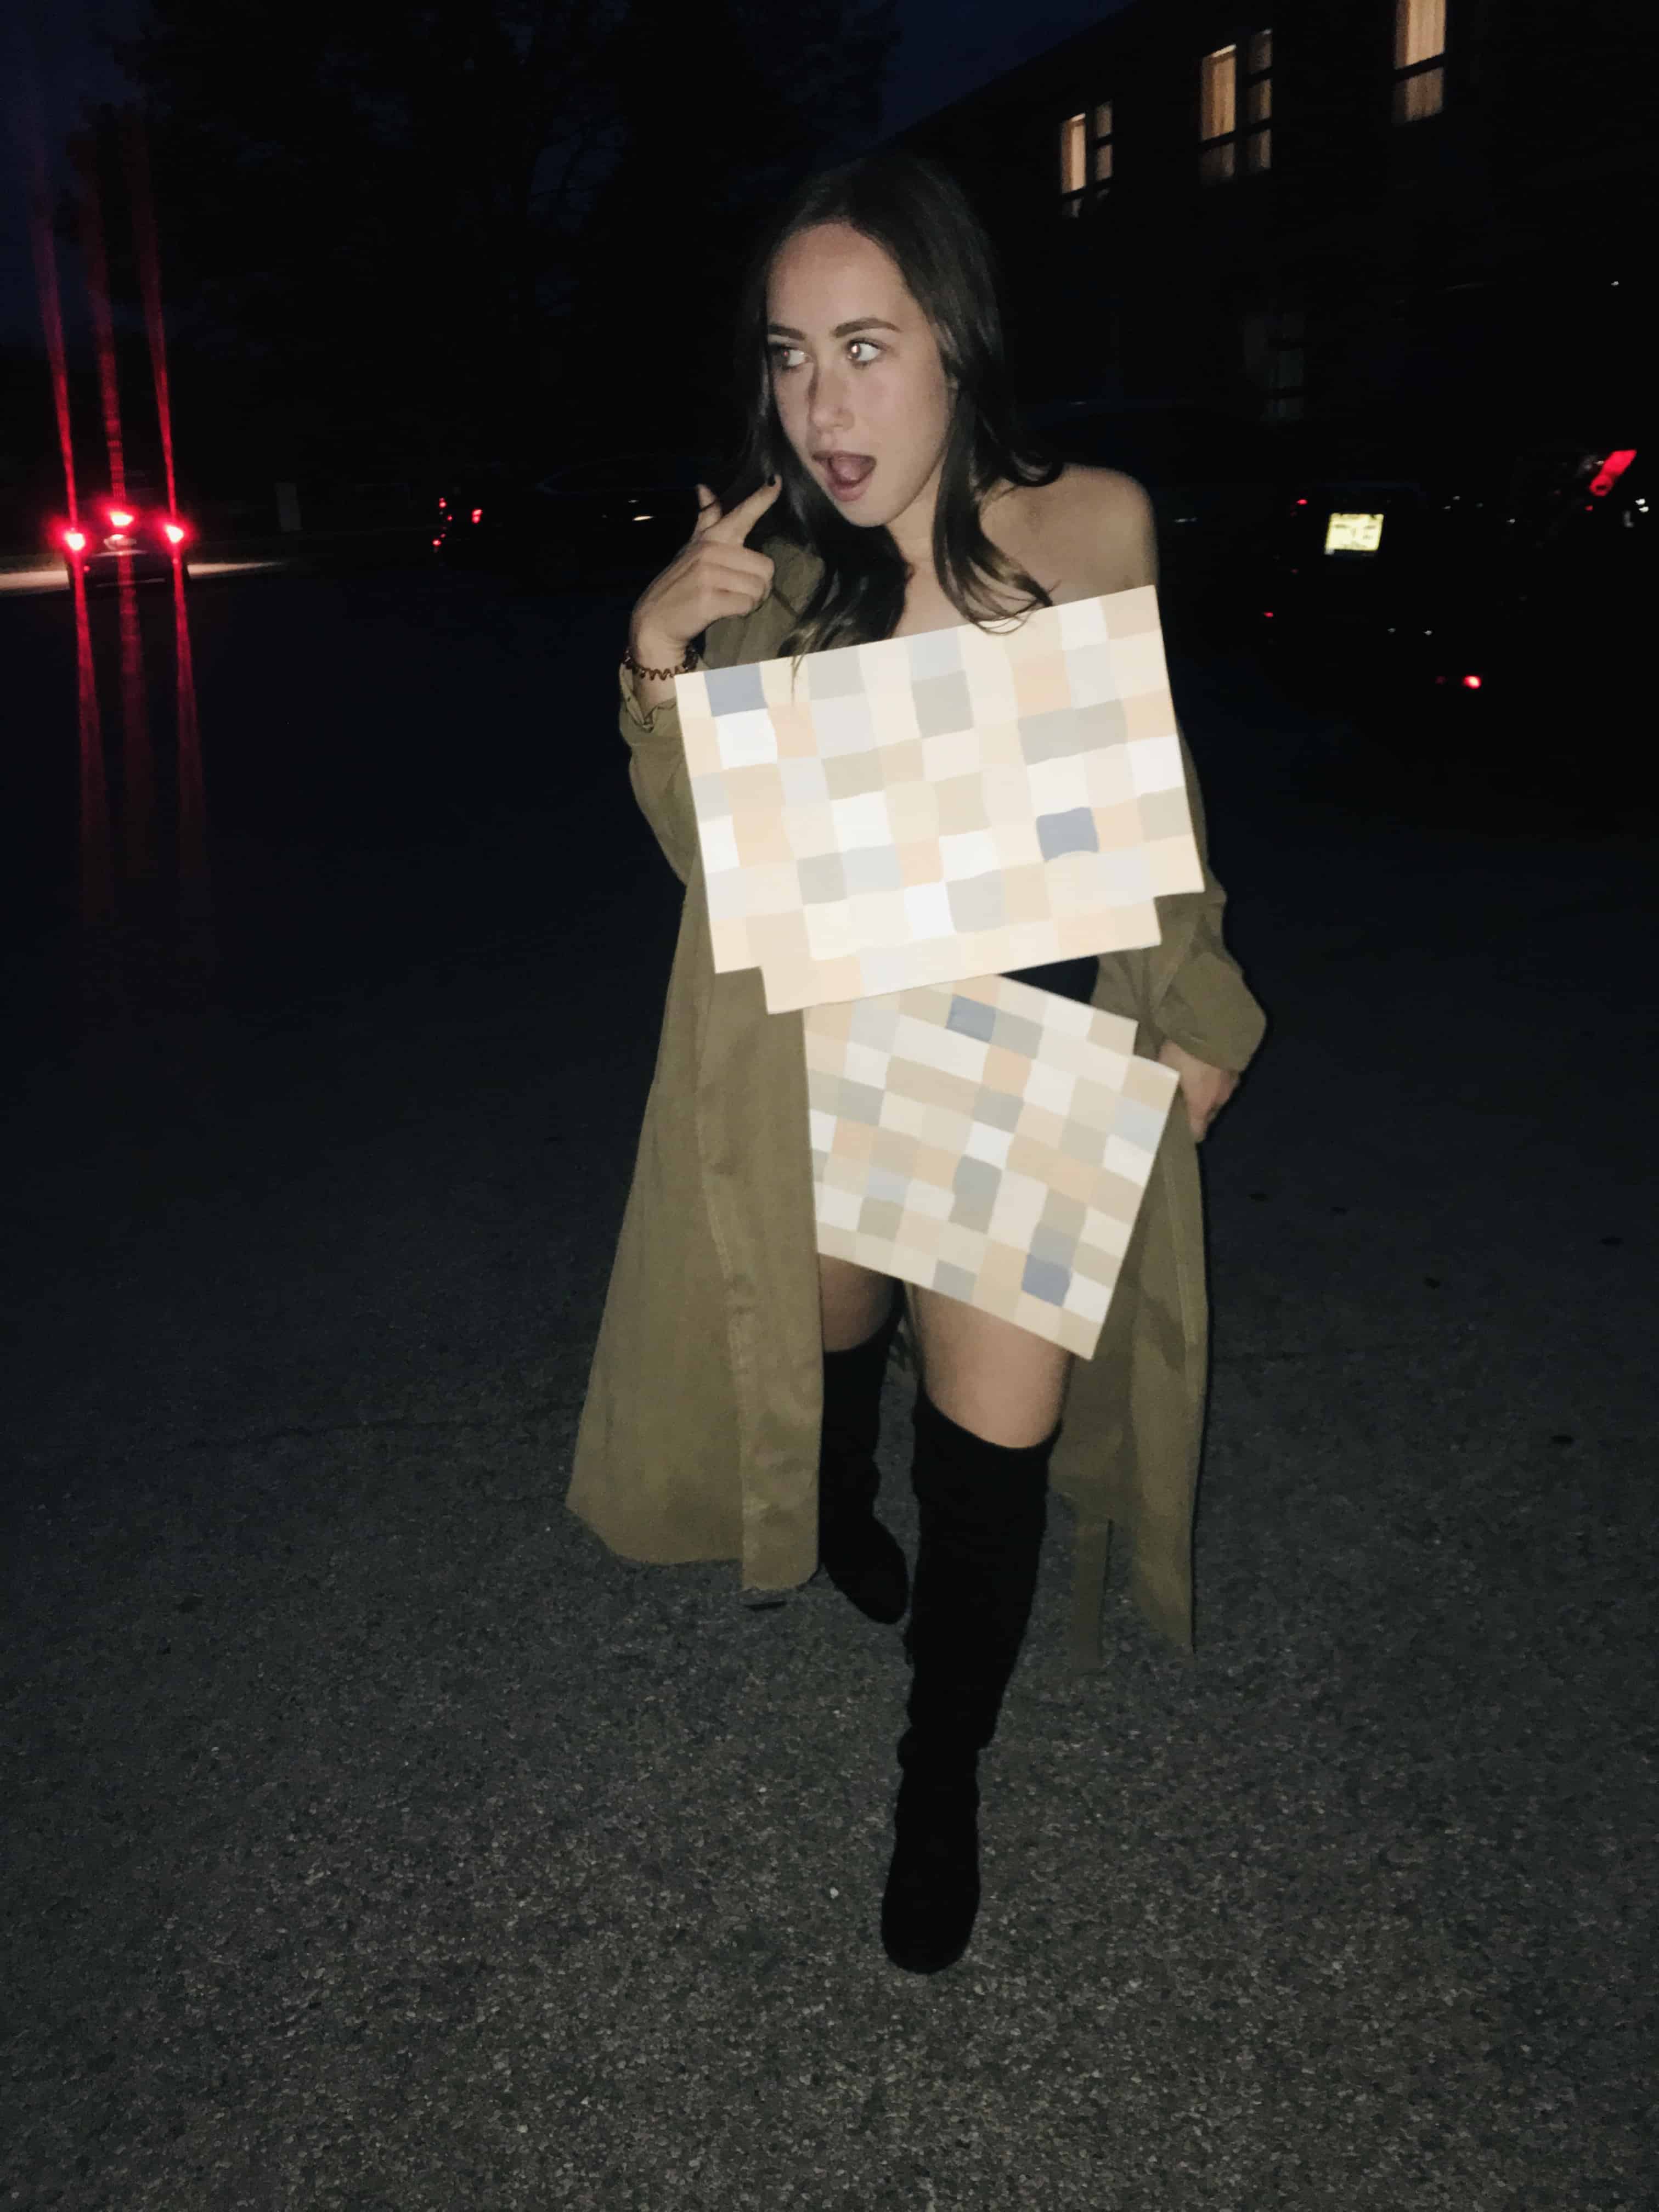 32 Easy Costumes To Copy That Are Perfect For The College Halloween Party By Sophia Lee